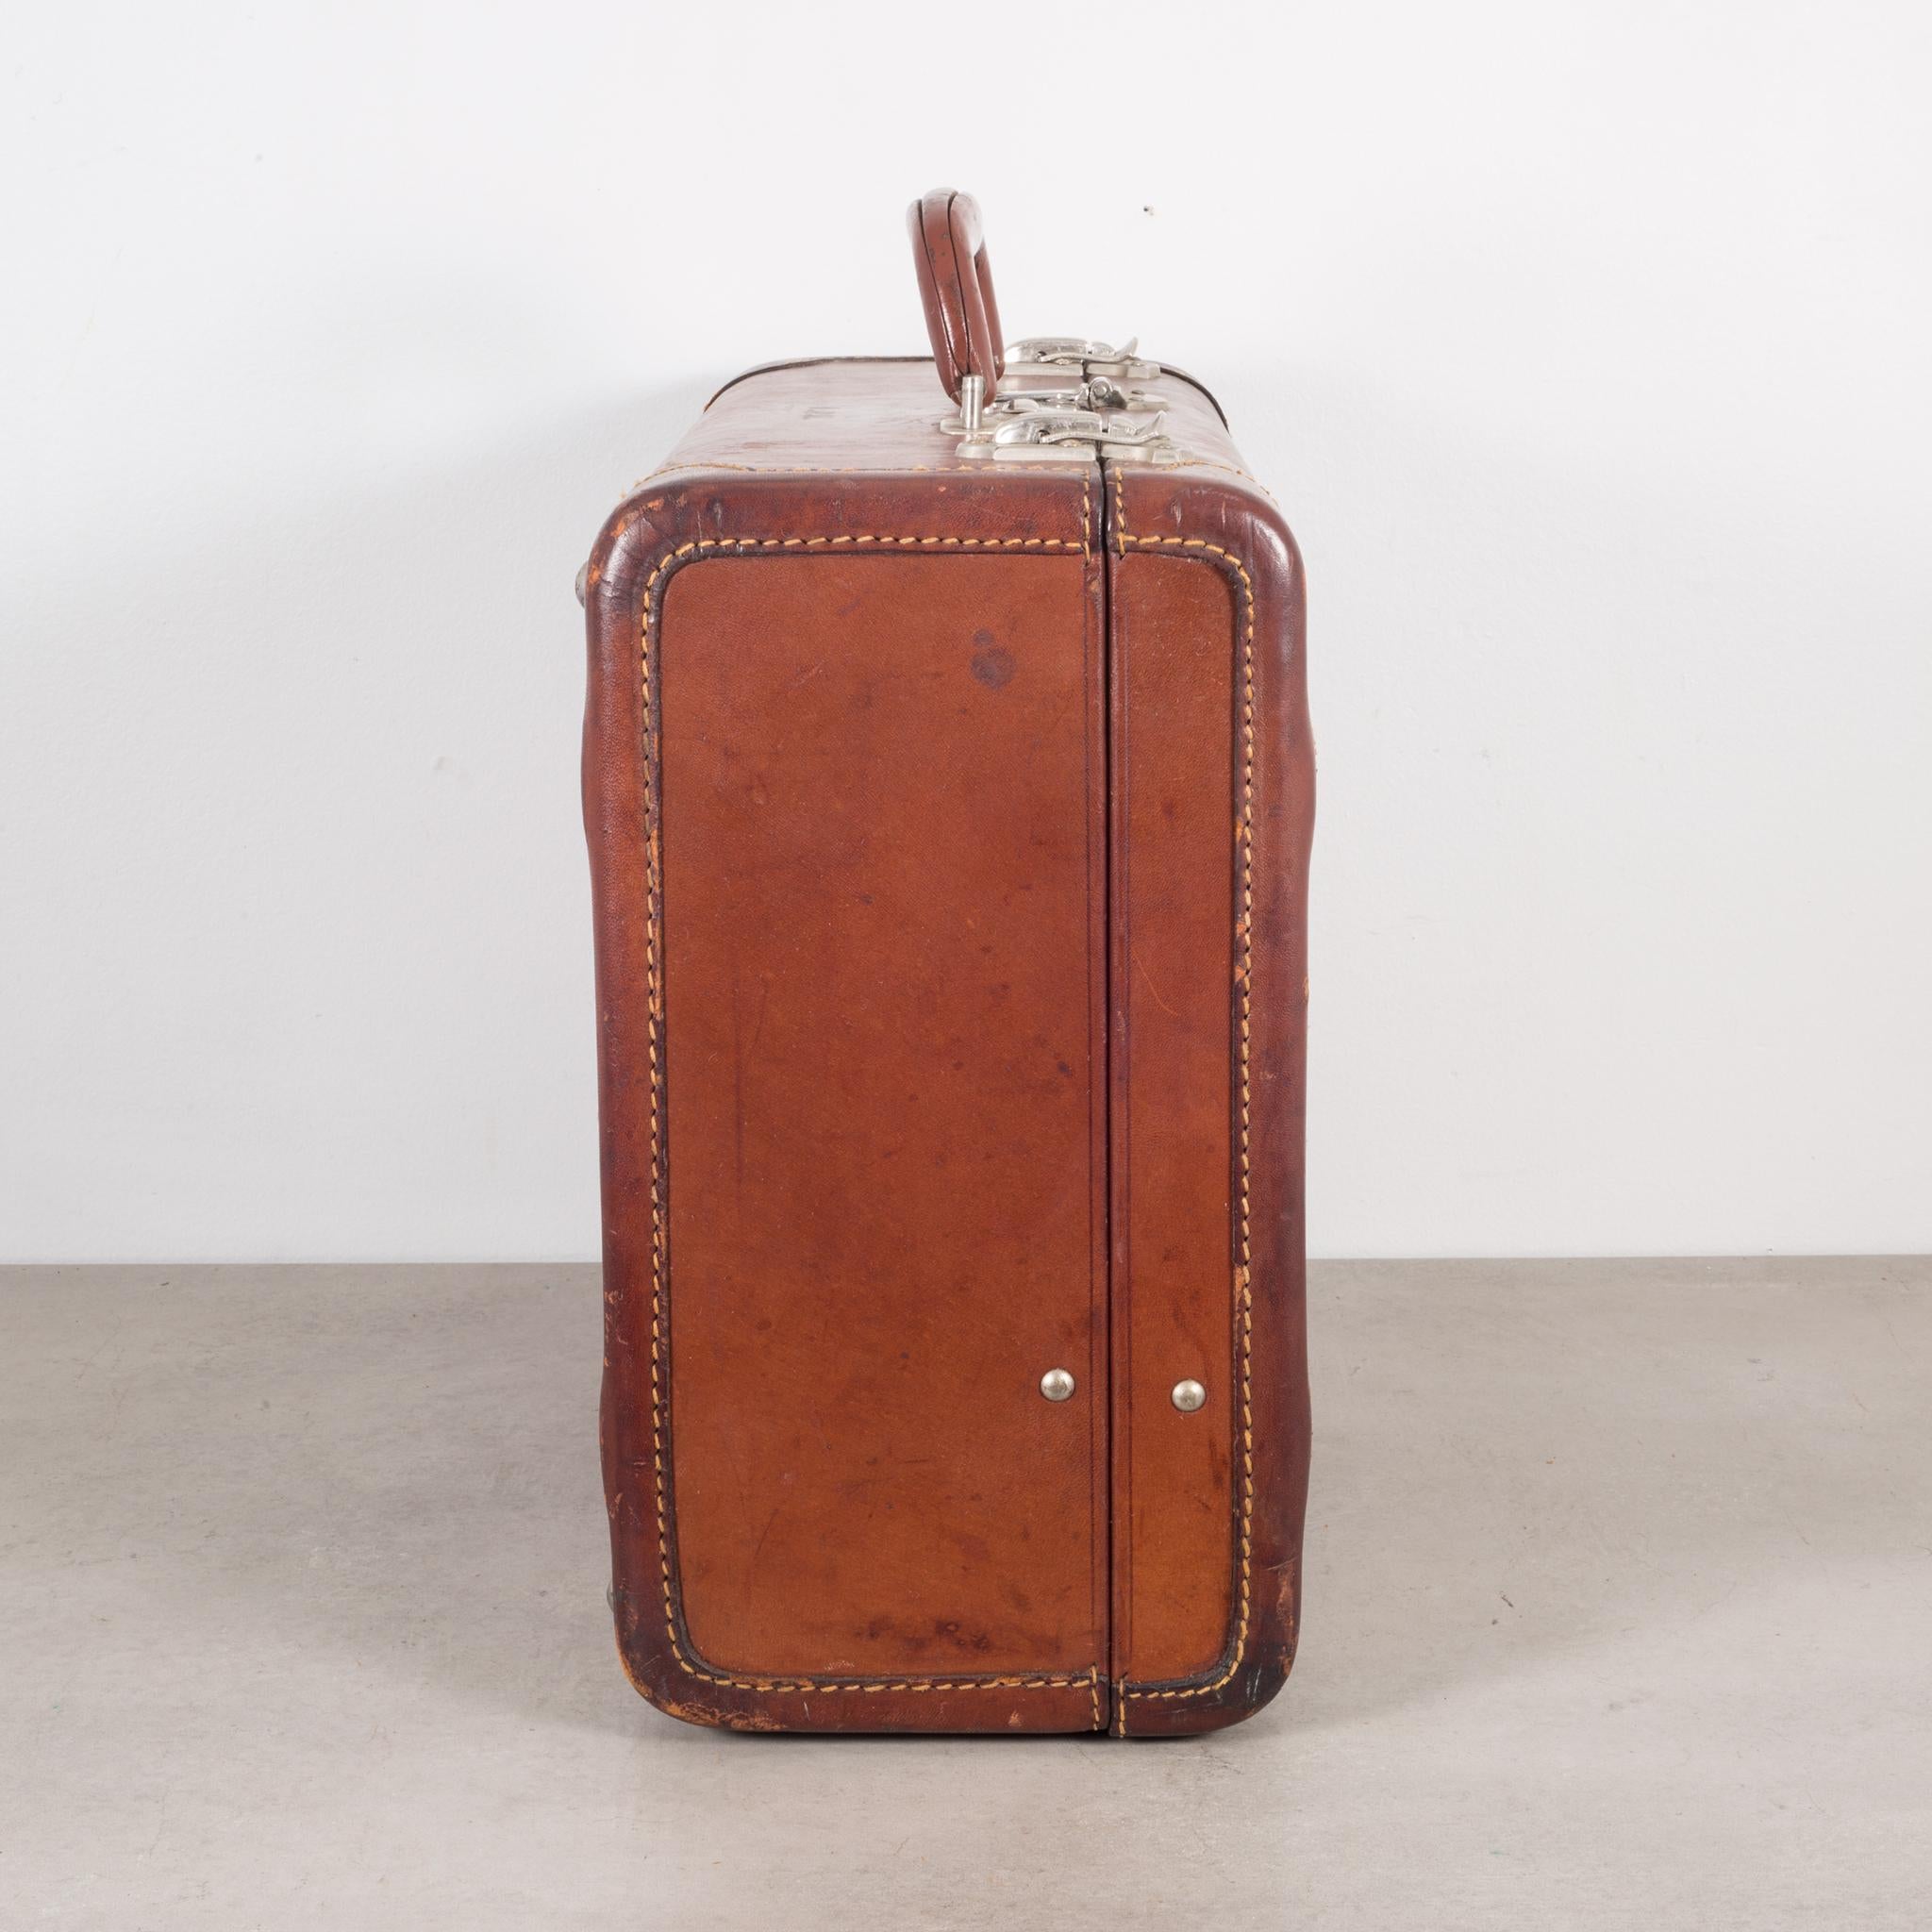 Industrial Monogrammed Small Leather Suitcase, circa 1940